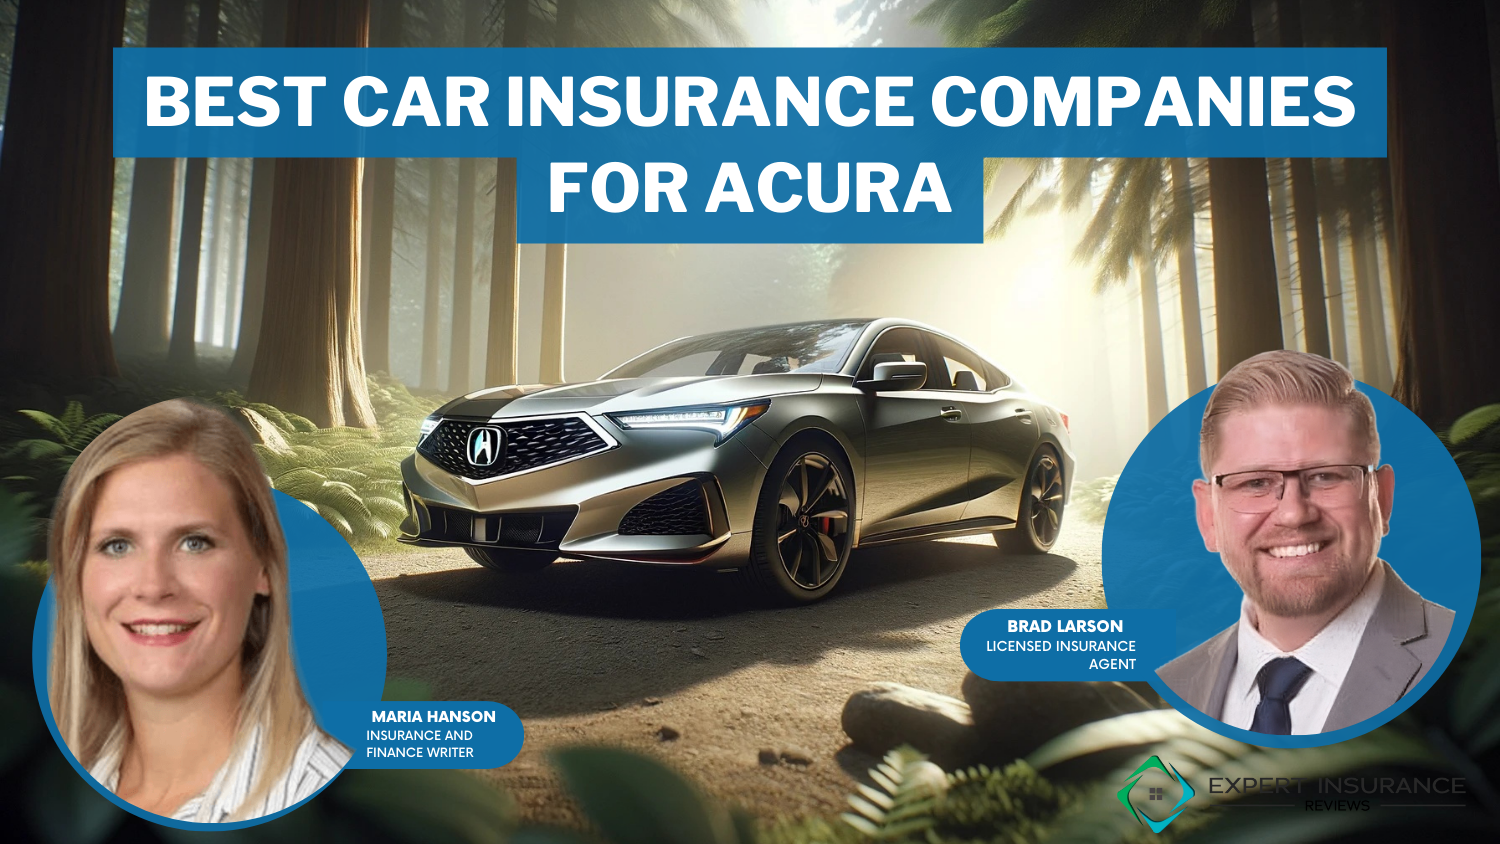 10 Best Car Insurance Companies for Acuras: Geico, State Farm, and Progressive